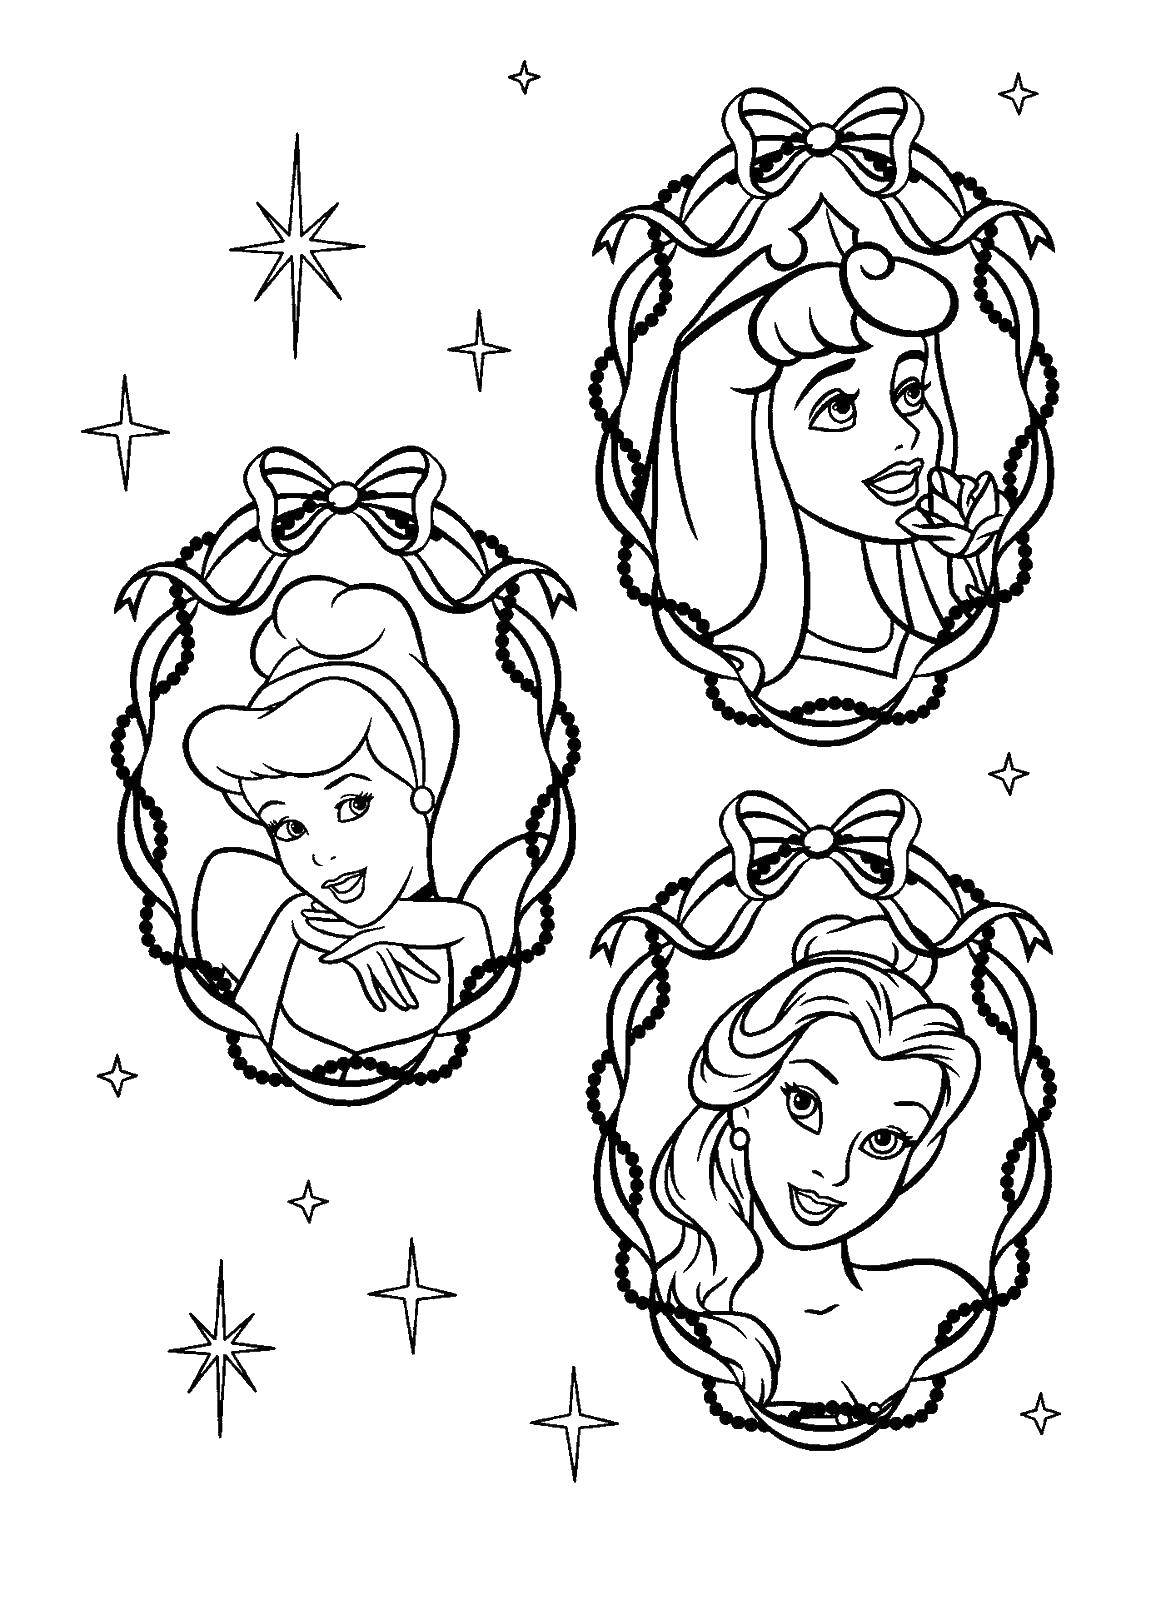 Coloring Cinderella, rose and Belle. Category coloring. Tags:  princesses, cartoons, fairy tales.